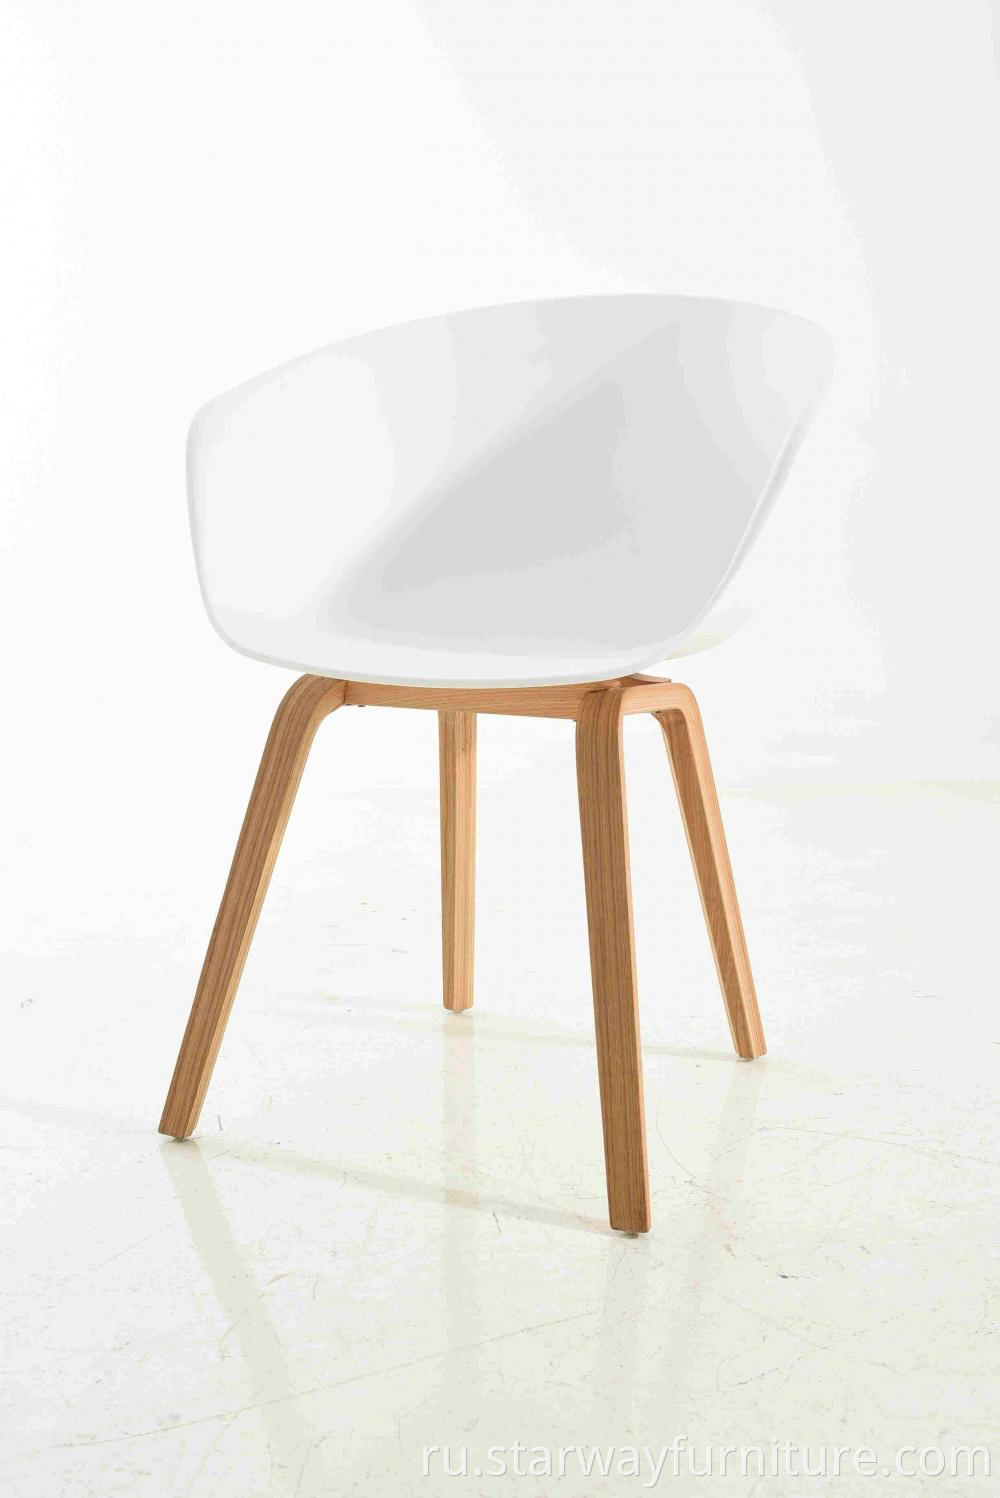 Shell Seat Plastic Chair